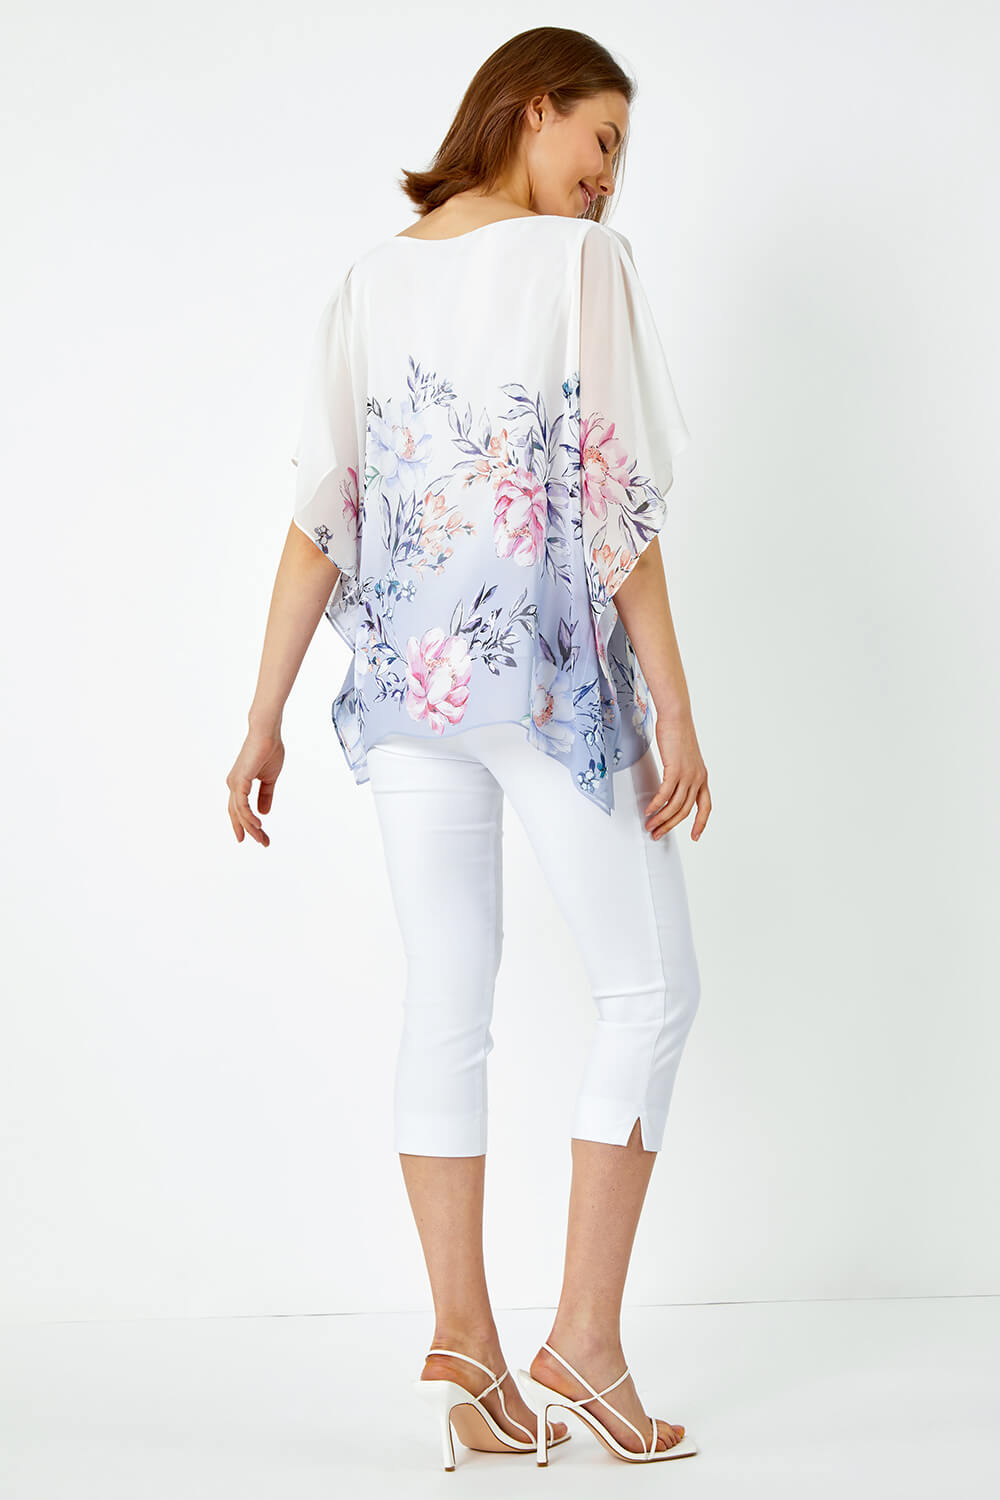 Lavender Floral Print Chiffon Overlay Top, Image 3 of 5